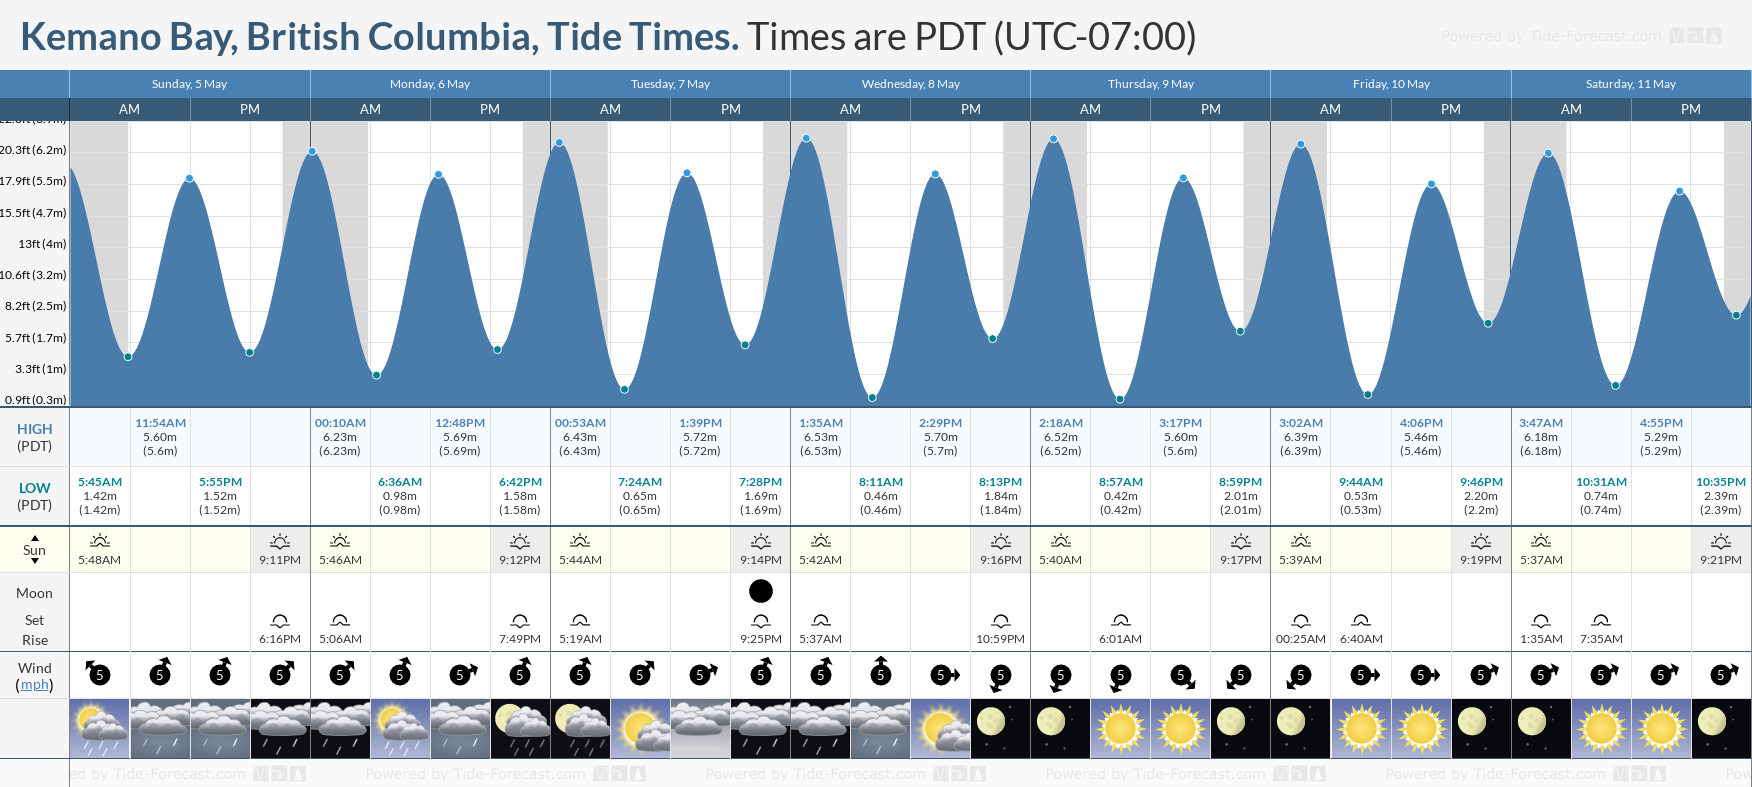 Kemano Bay, British Columbia Tide Chart including high and low tide tide times for the next 7 days